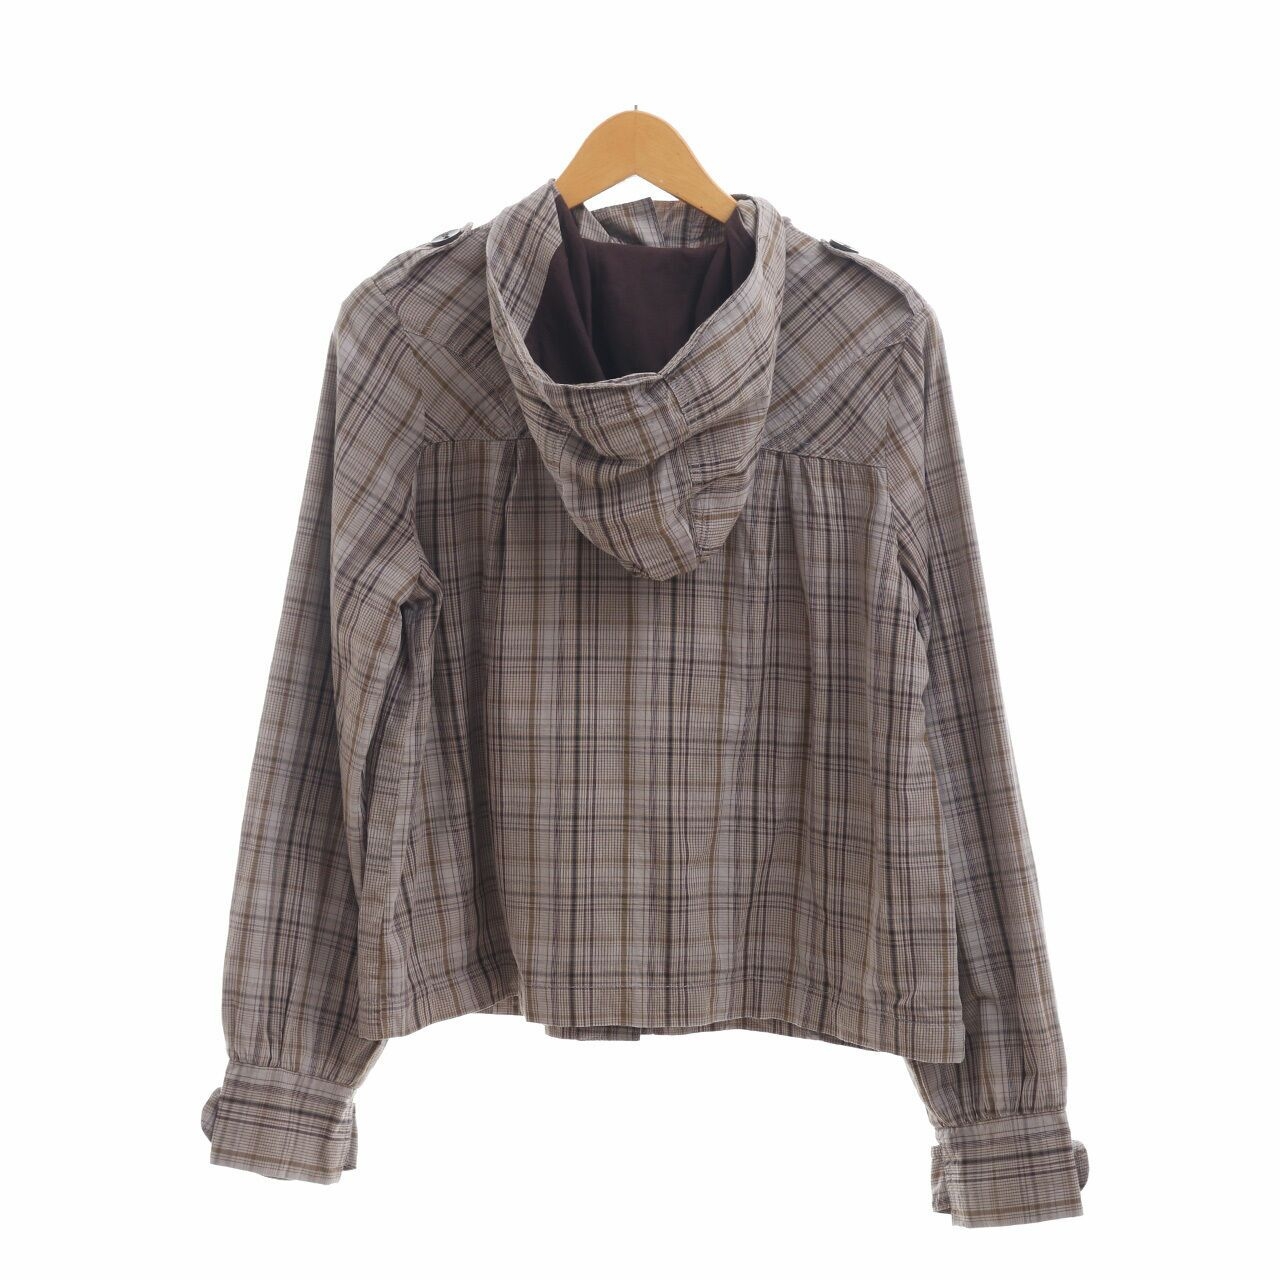 Topshop Grey Checkered Hoodie Blouse